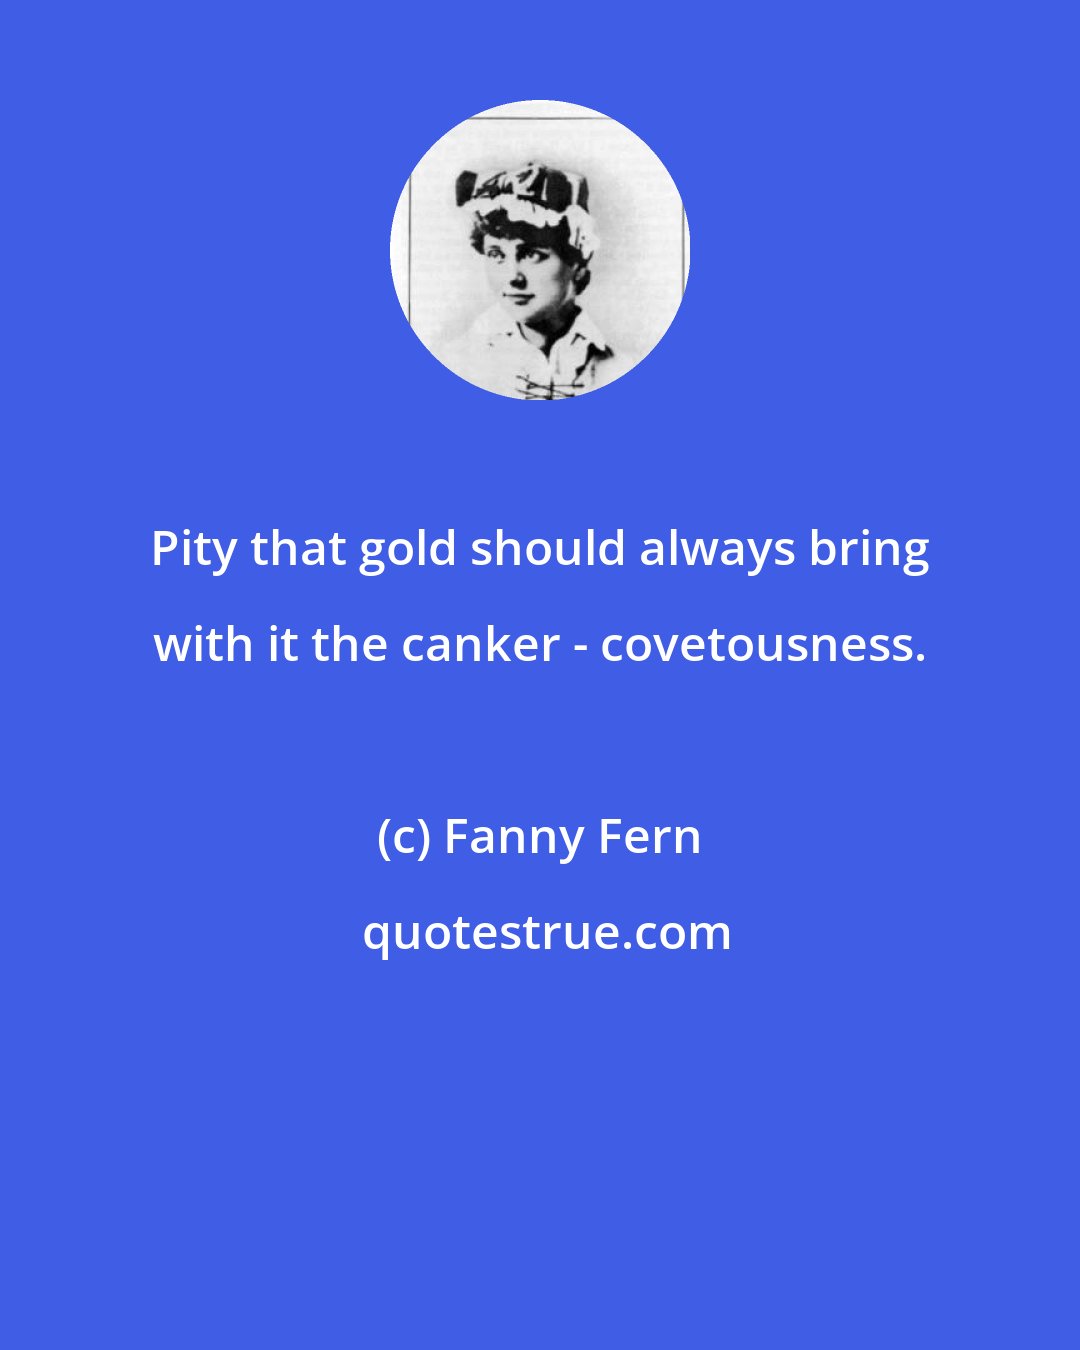 Fanny Fern: Pity that gold should always bring with it the canker - covetousness.